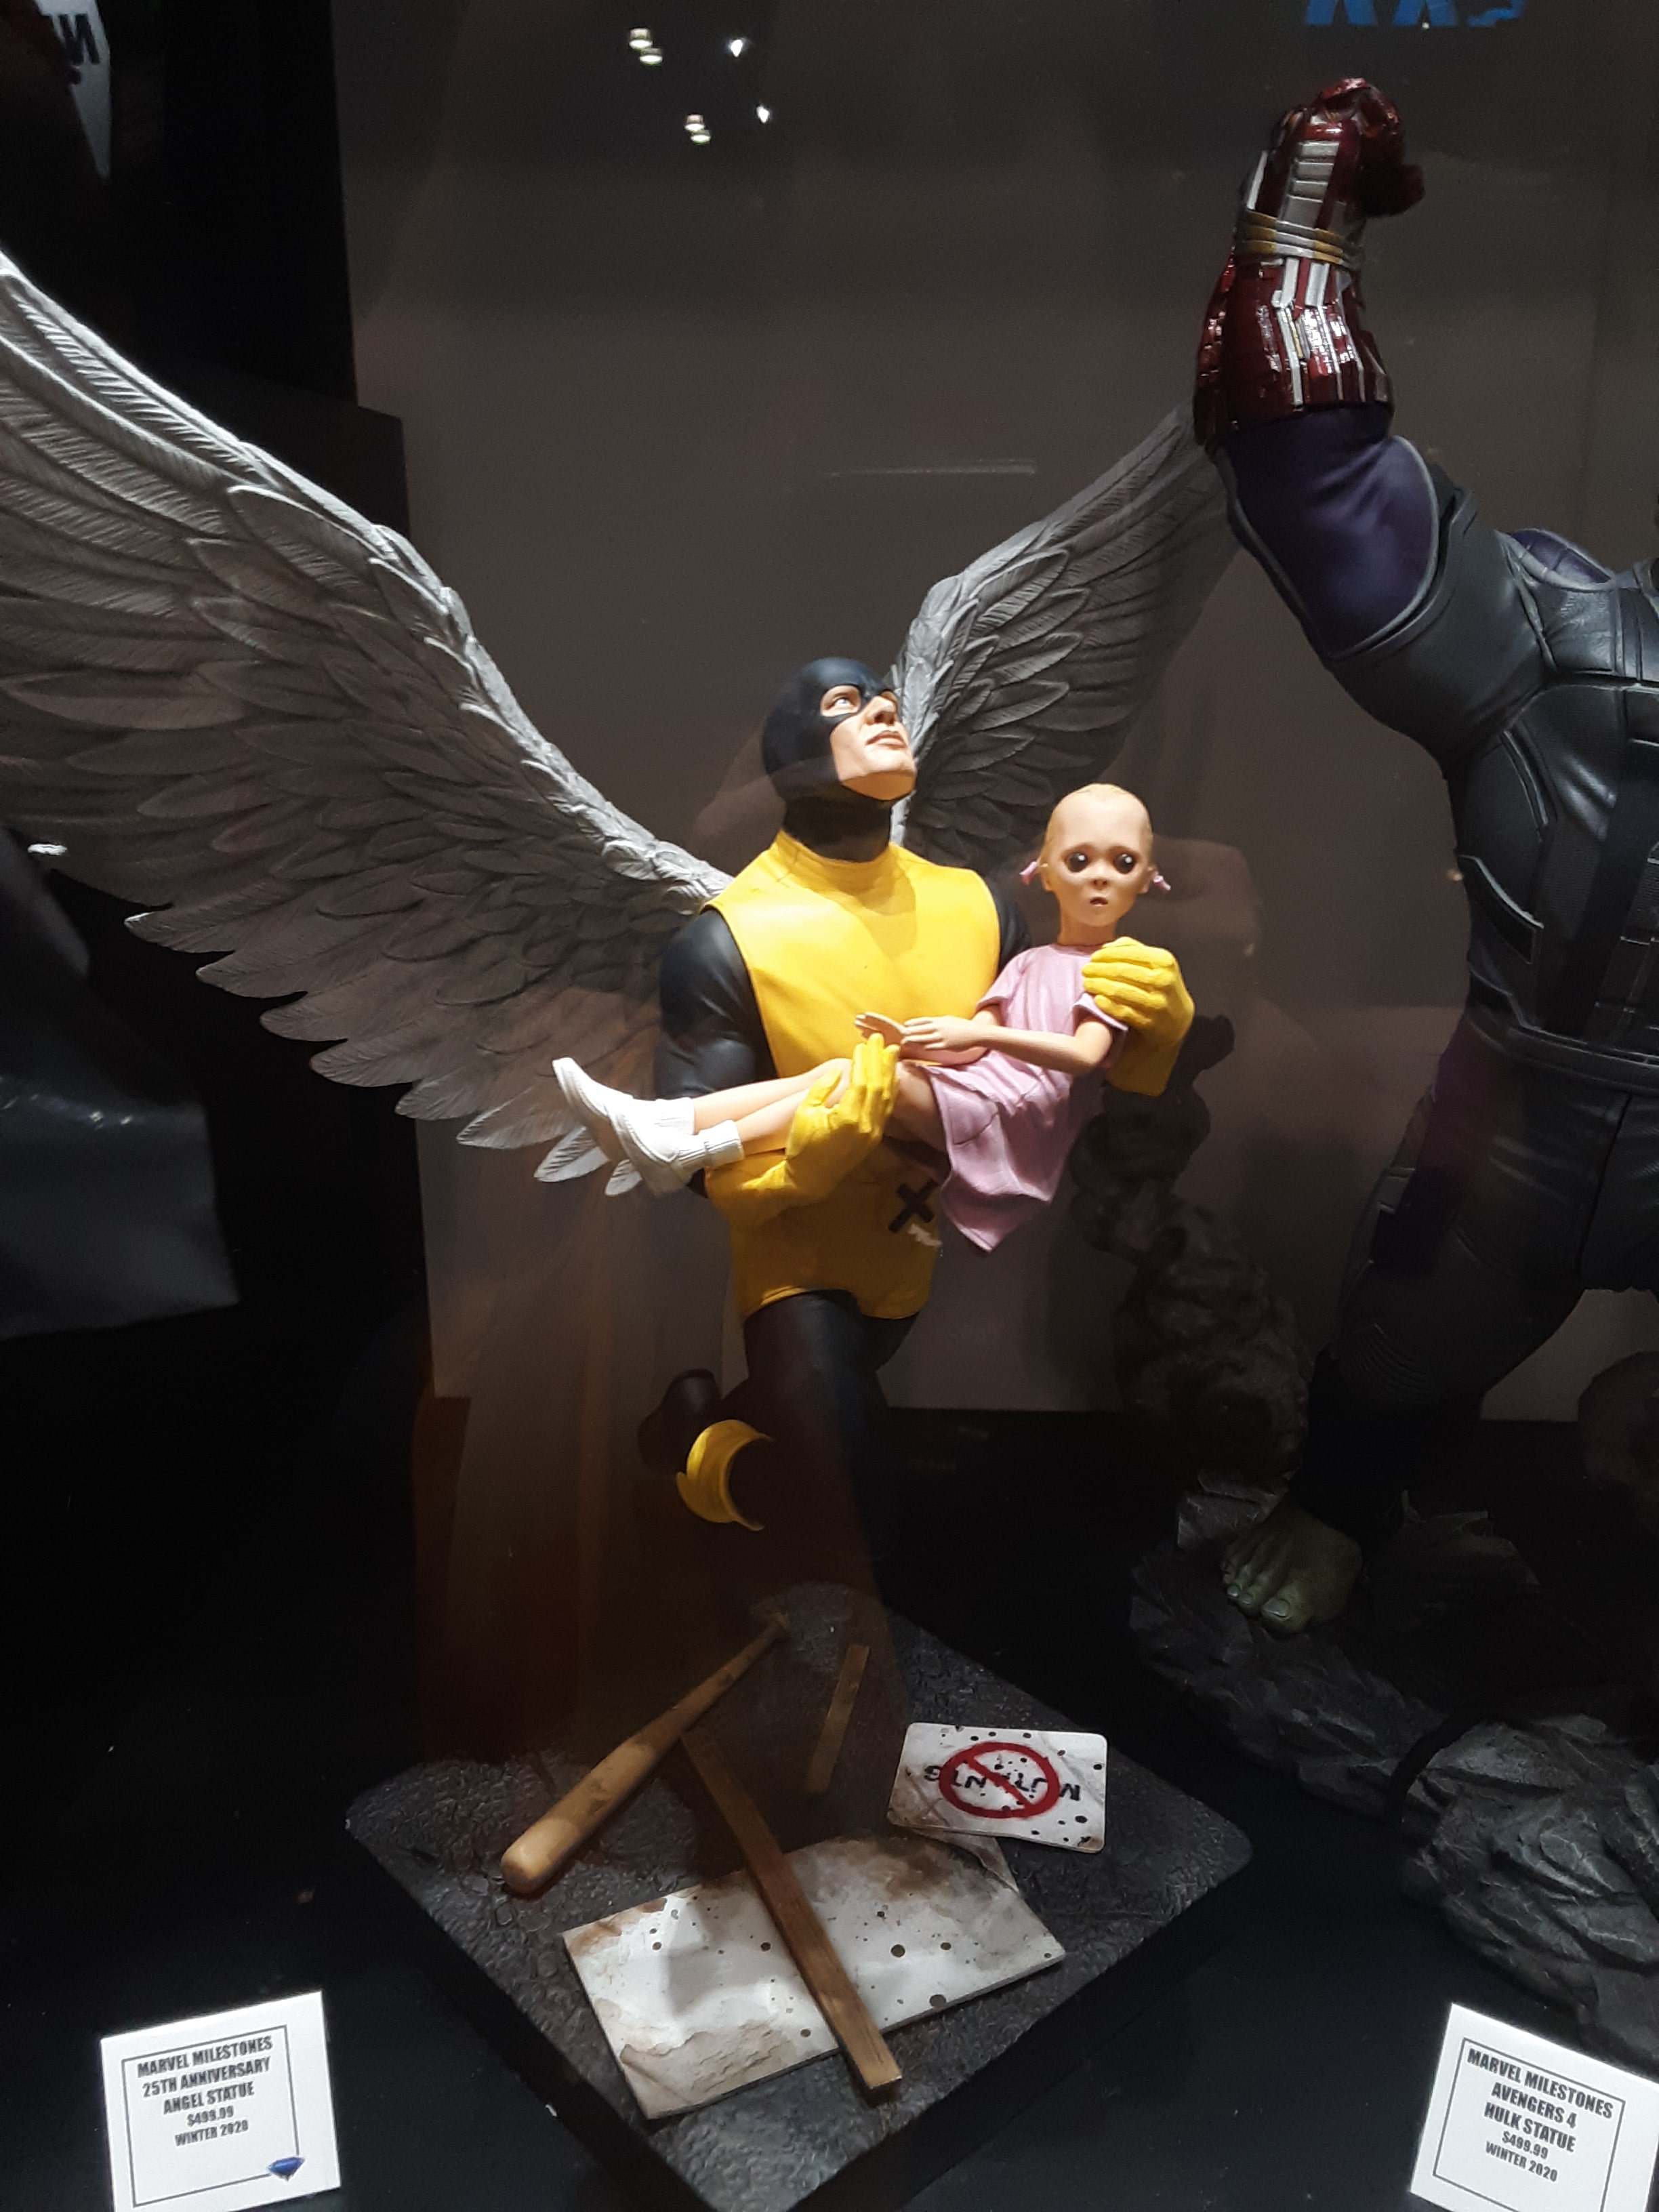 EVERY Marvel item on display for Diamond Select toys at NYCC19